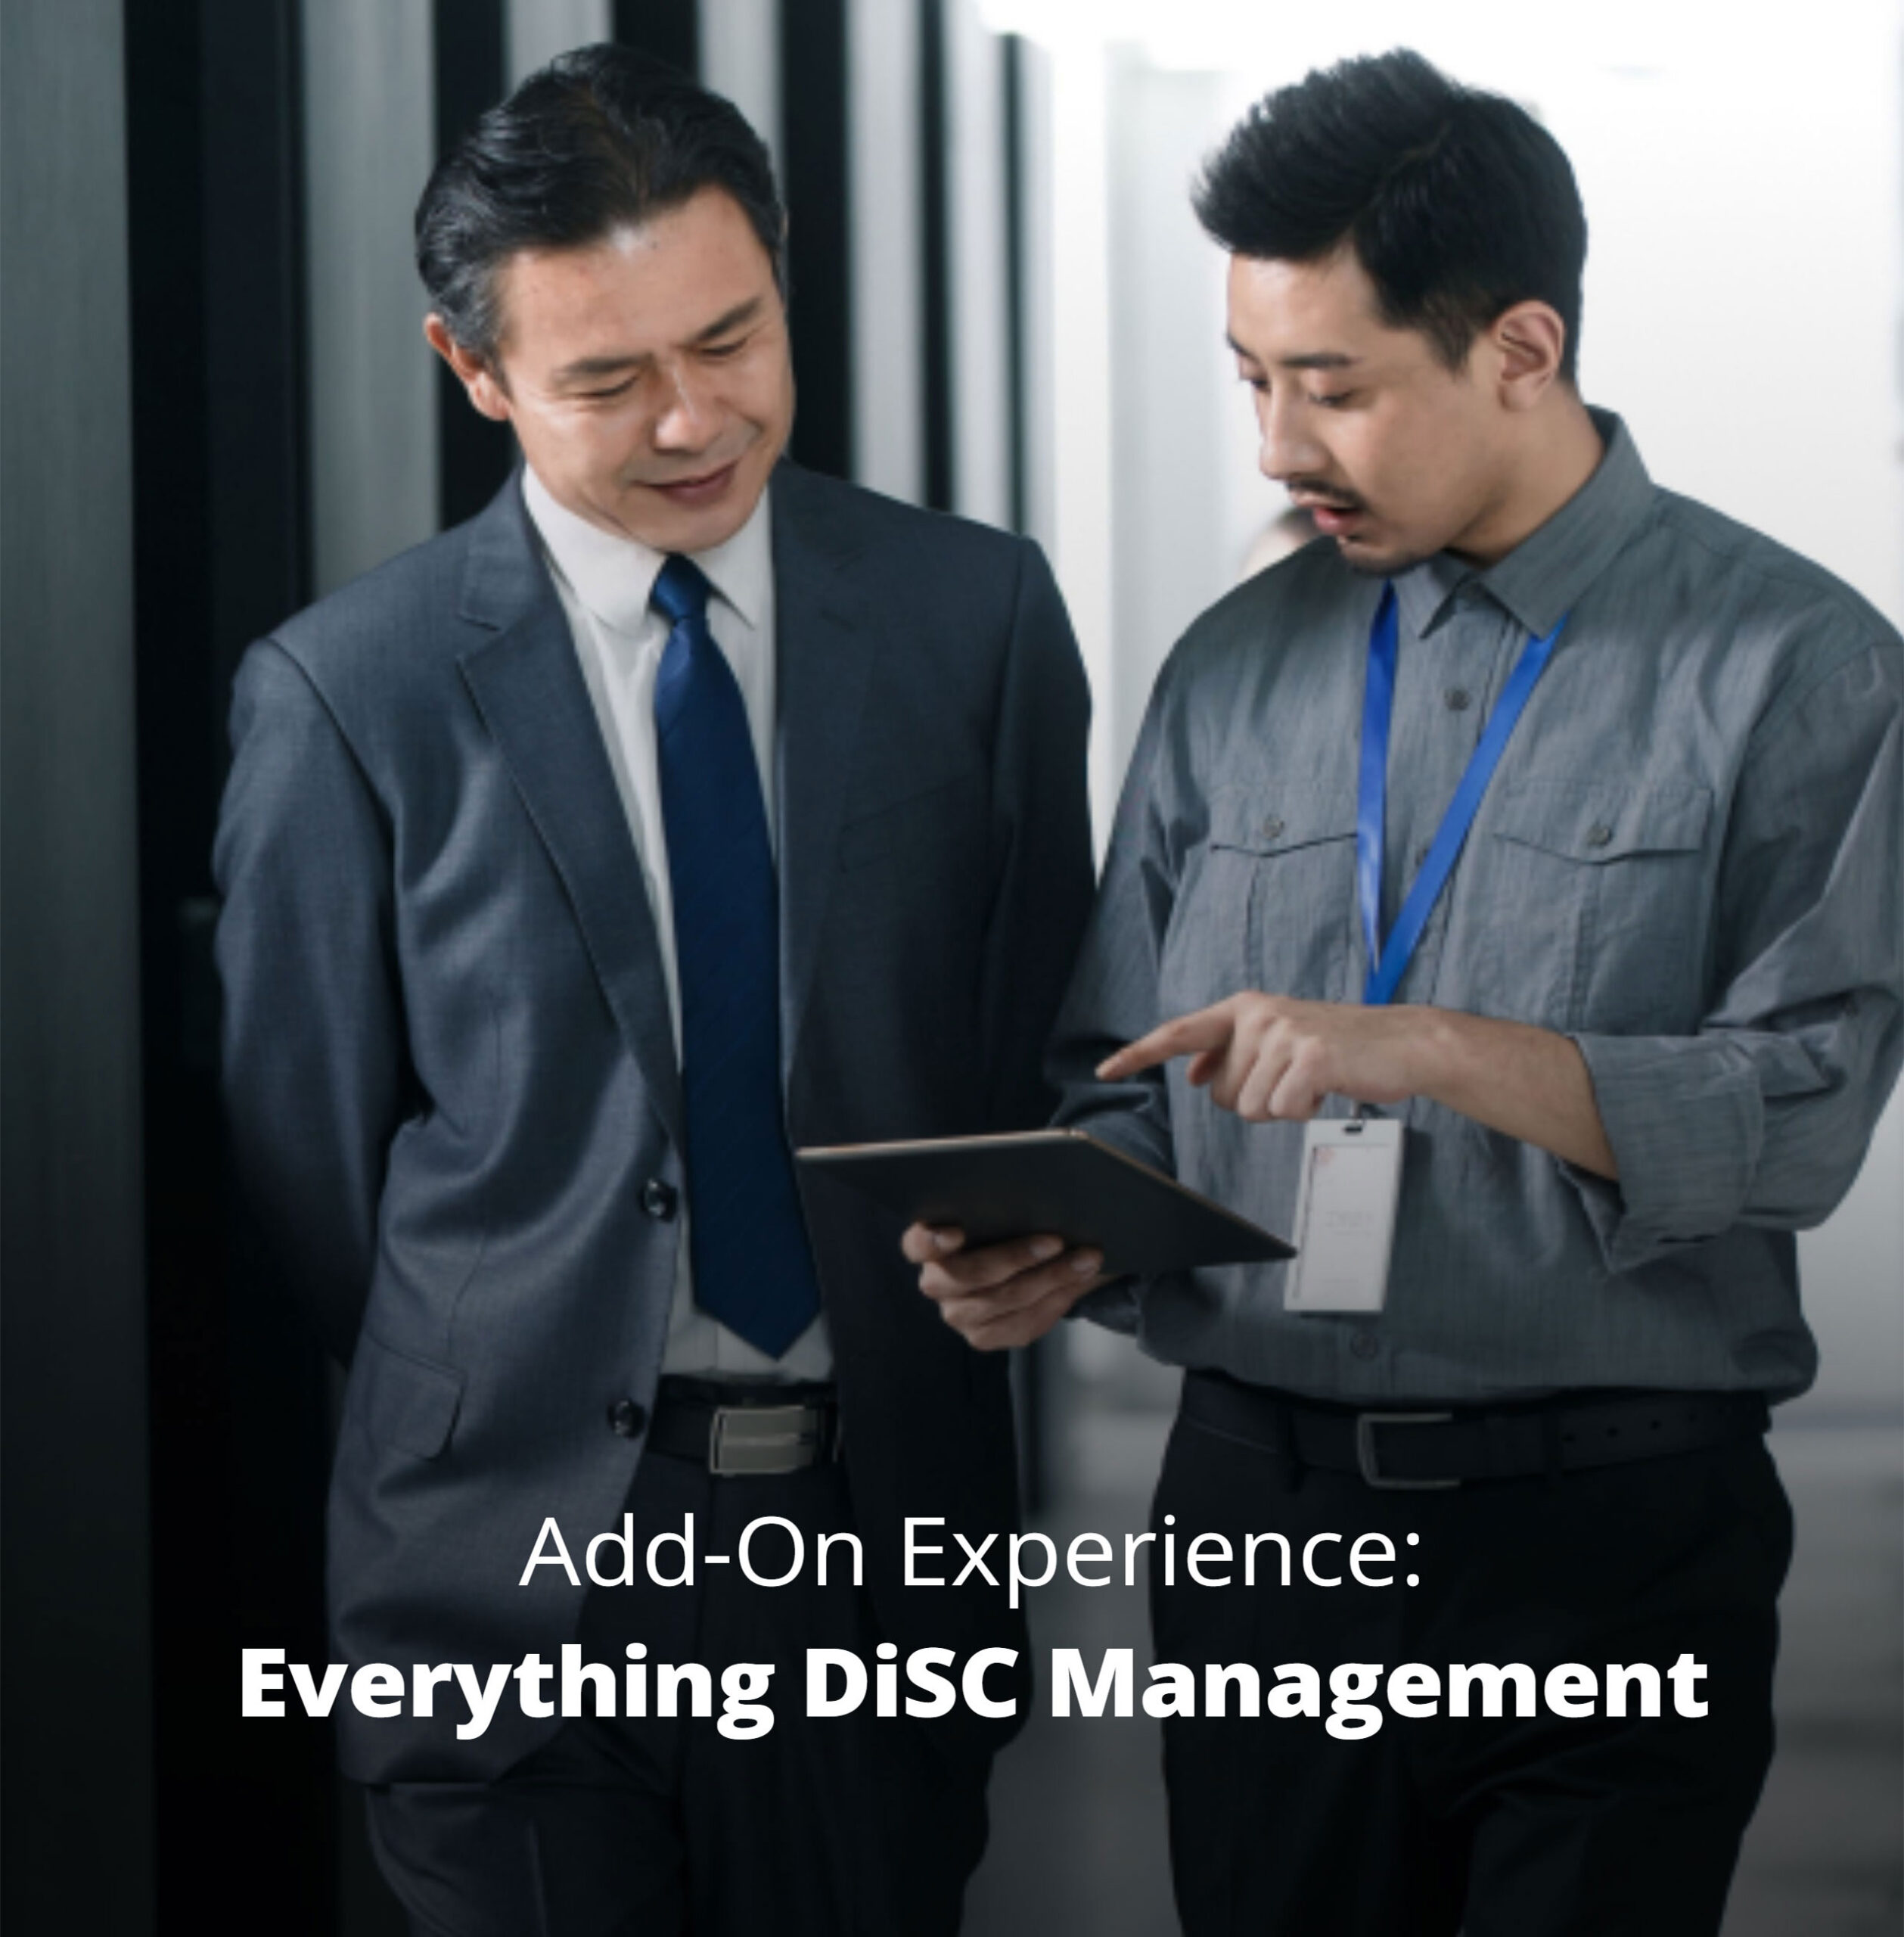 Add-On Experience Everything DiSC Management